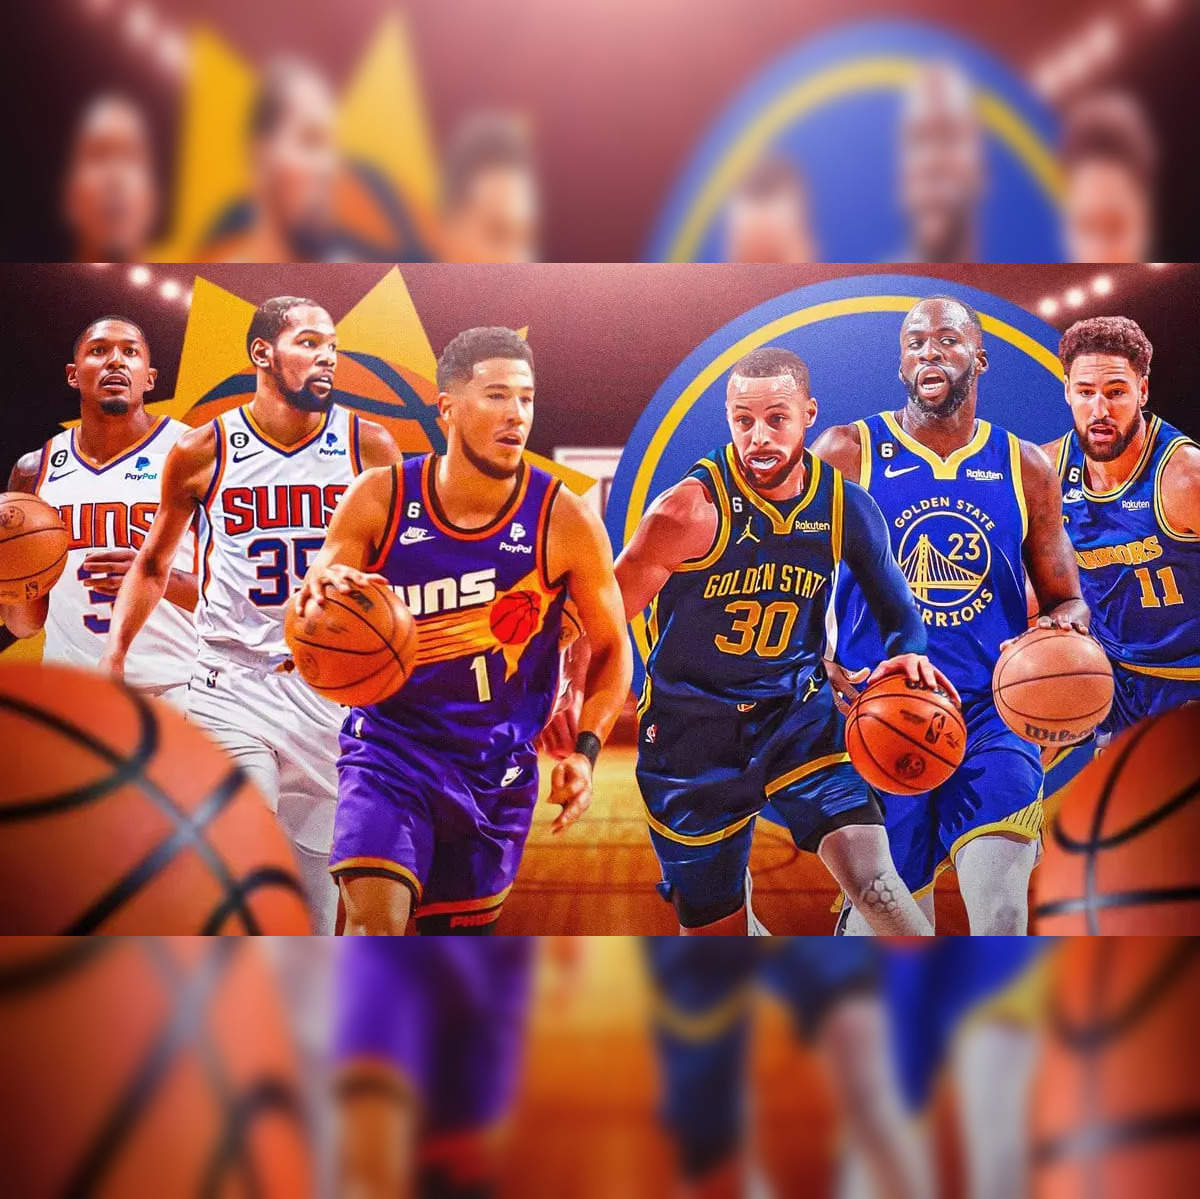 Warriors vs Suns live Golden State Warriors vs Phoenix Suns live streaming Start time, where to watch NBA games today